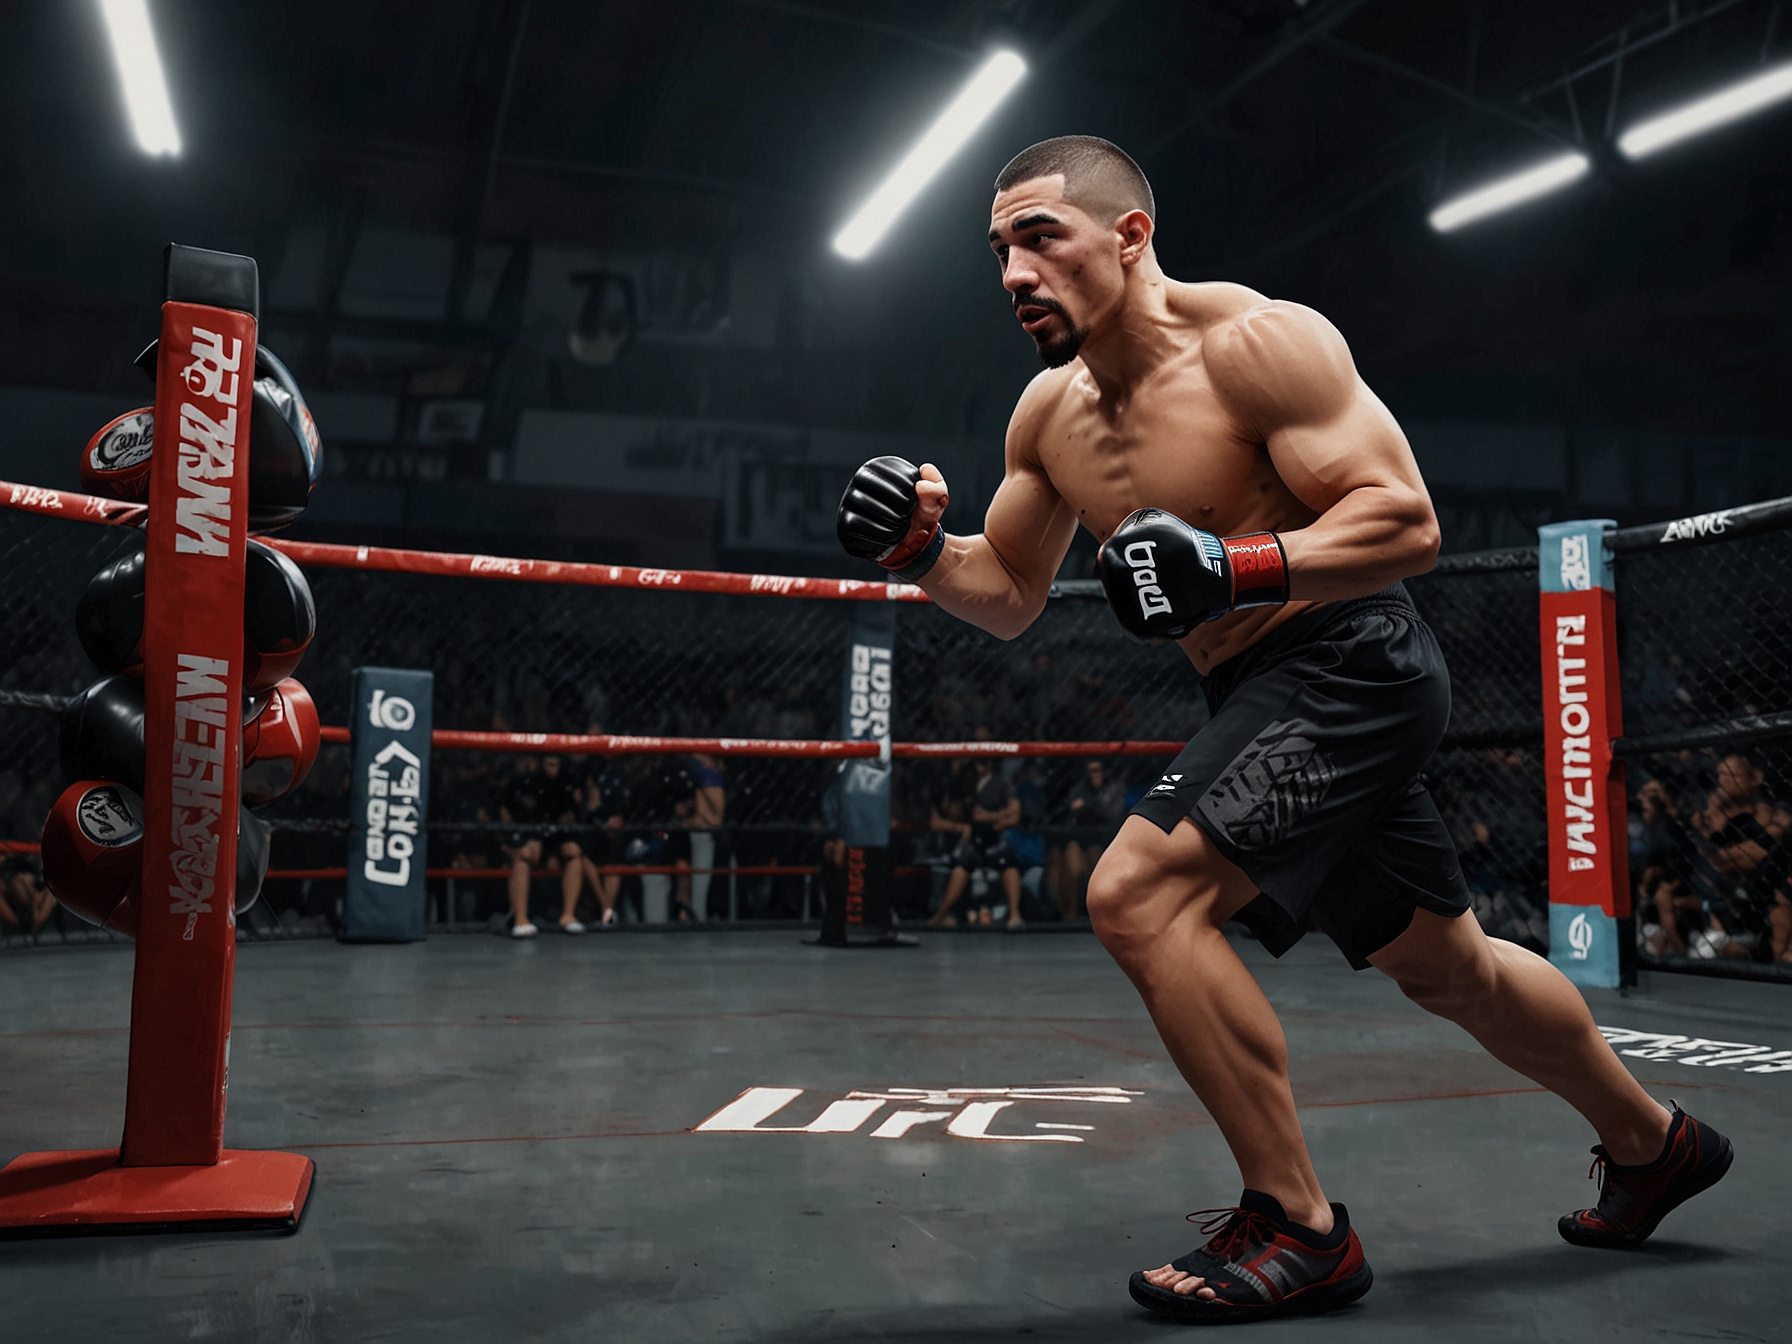 Robert Whittaker training in a gym, showcasing his intense preparation and strategic mindset as he gears up for his unexpected bout against Ikram Aliskerov at UFC Saudi Arabia.